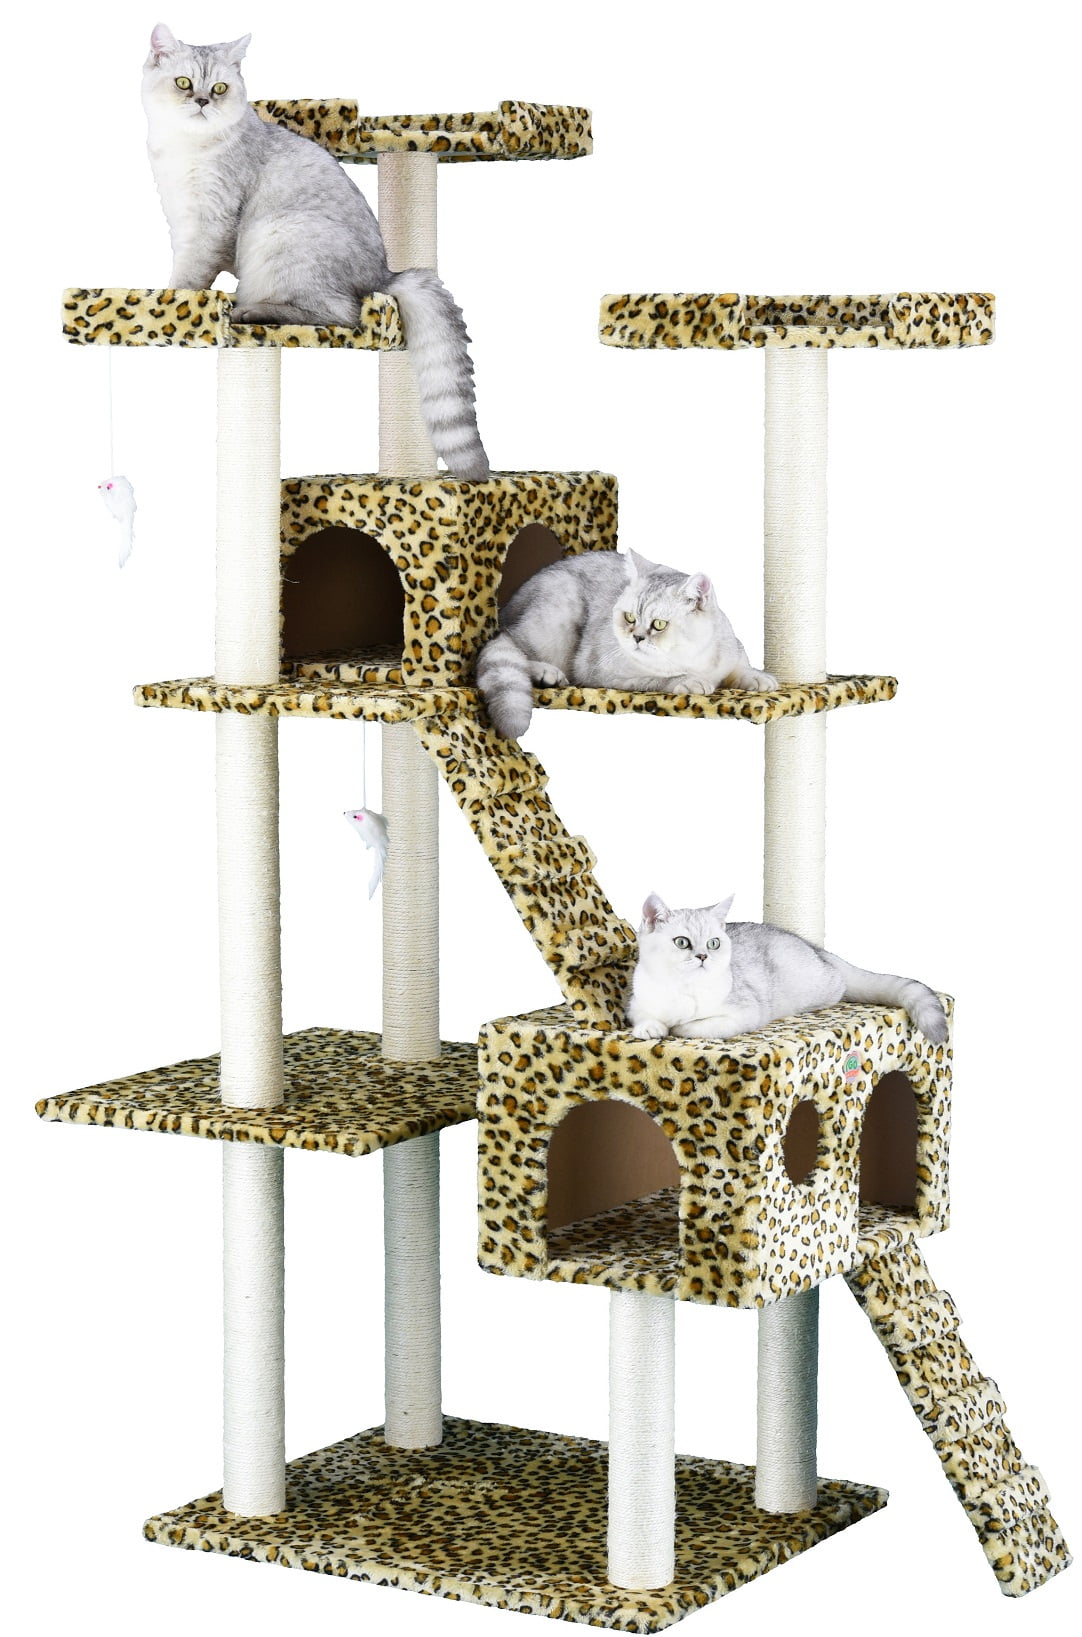 Go Pet Club Cat Tree Condo House Leopard Kitty Furniture Tower Scratch Play New 